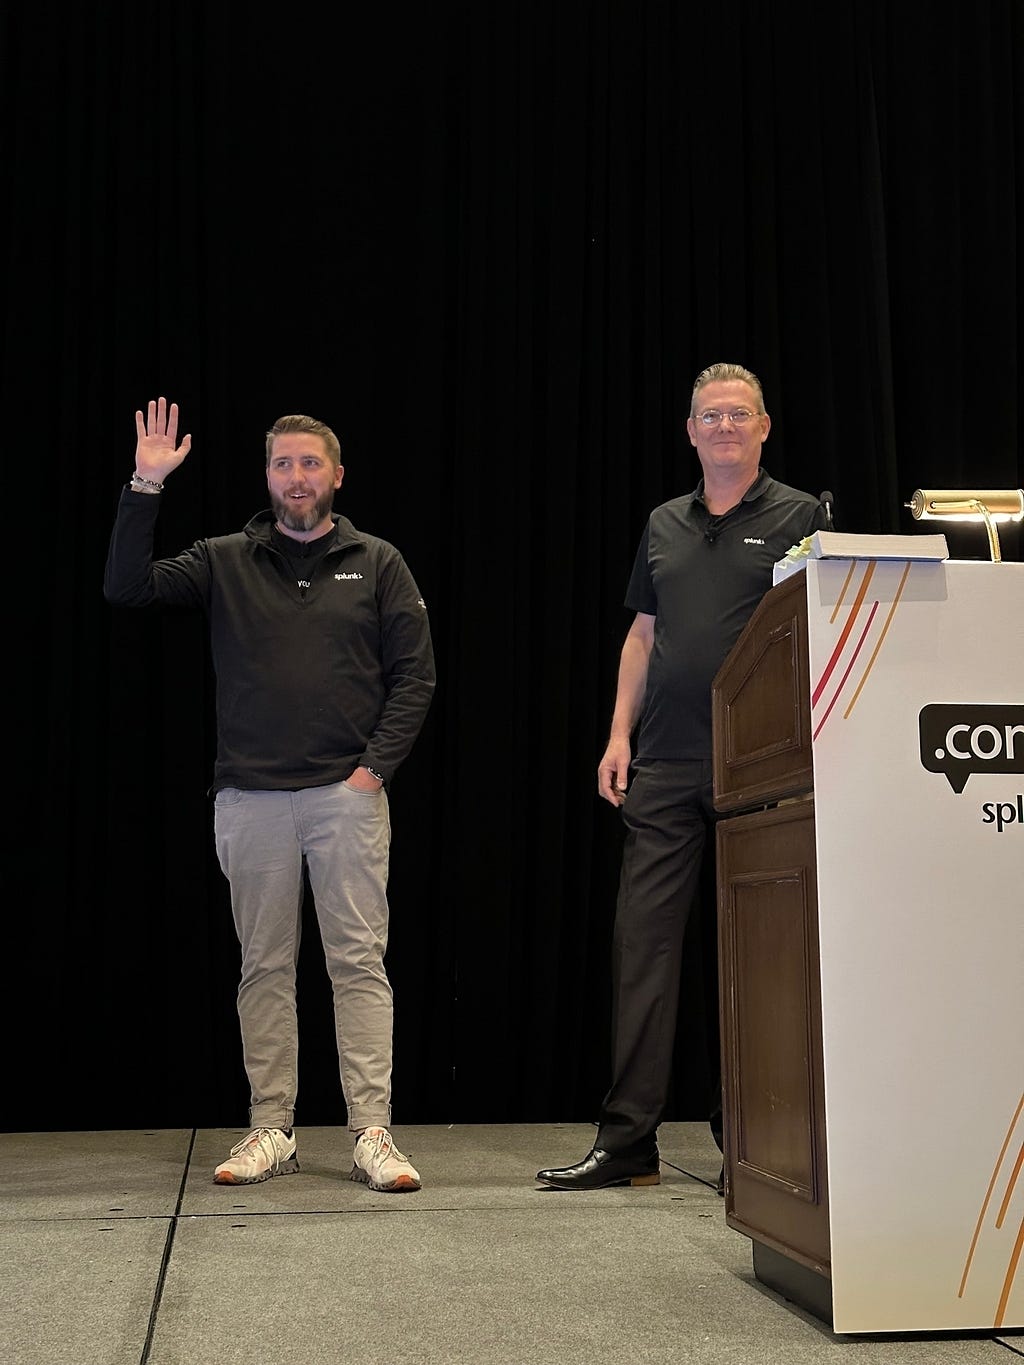 Two men stand on a stage with one waving, beside a podium with a Splunk logo.